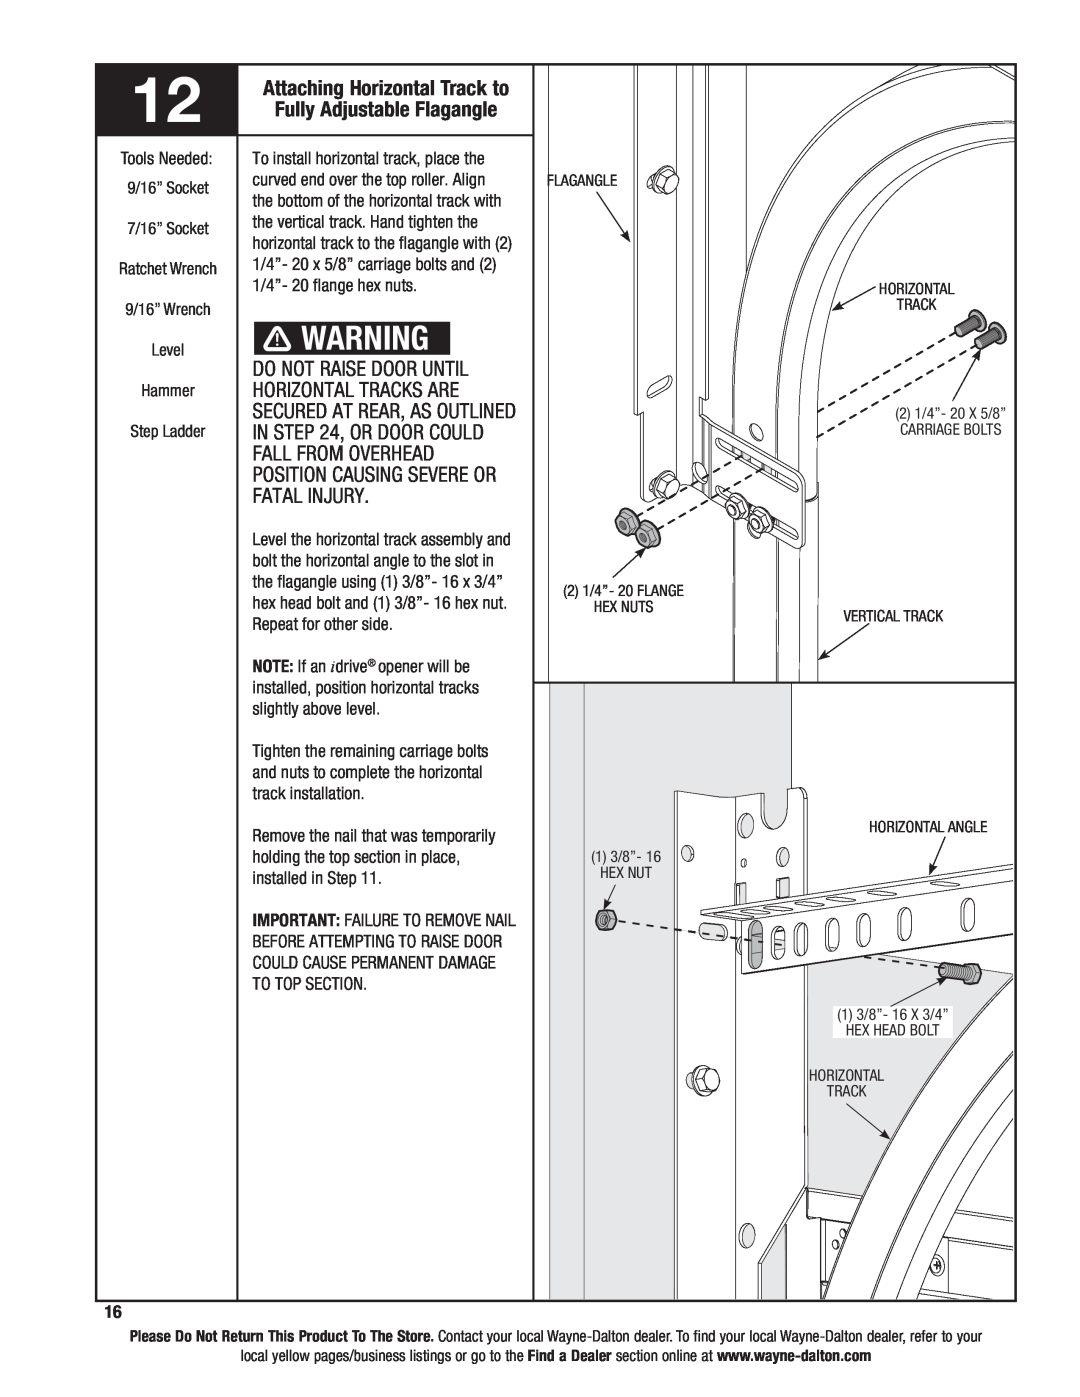 Wayne-Dalton 9100 Attaching Horizontal Track to, Fully Adjustable Flagangle, Do Not Raise Door Until, Fall From Overhead 